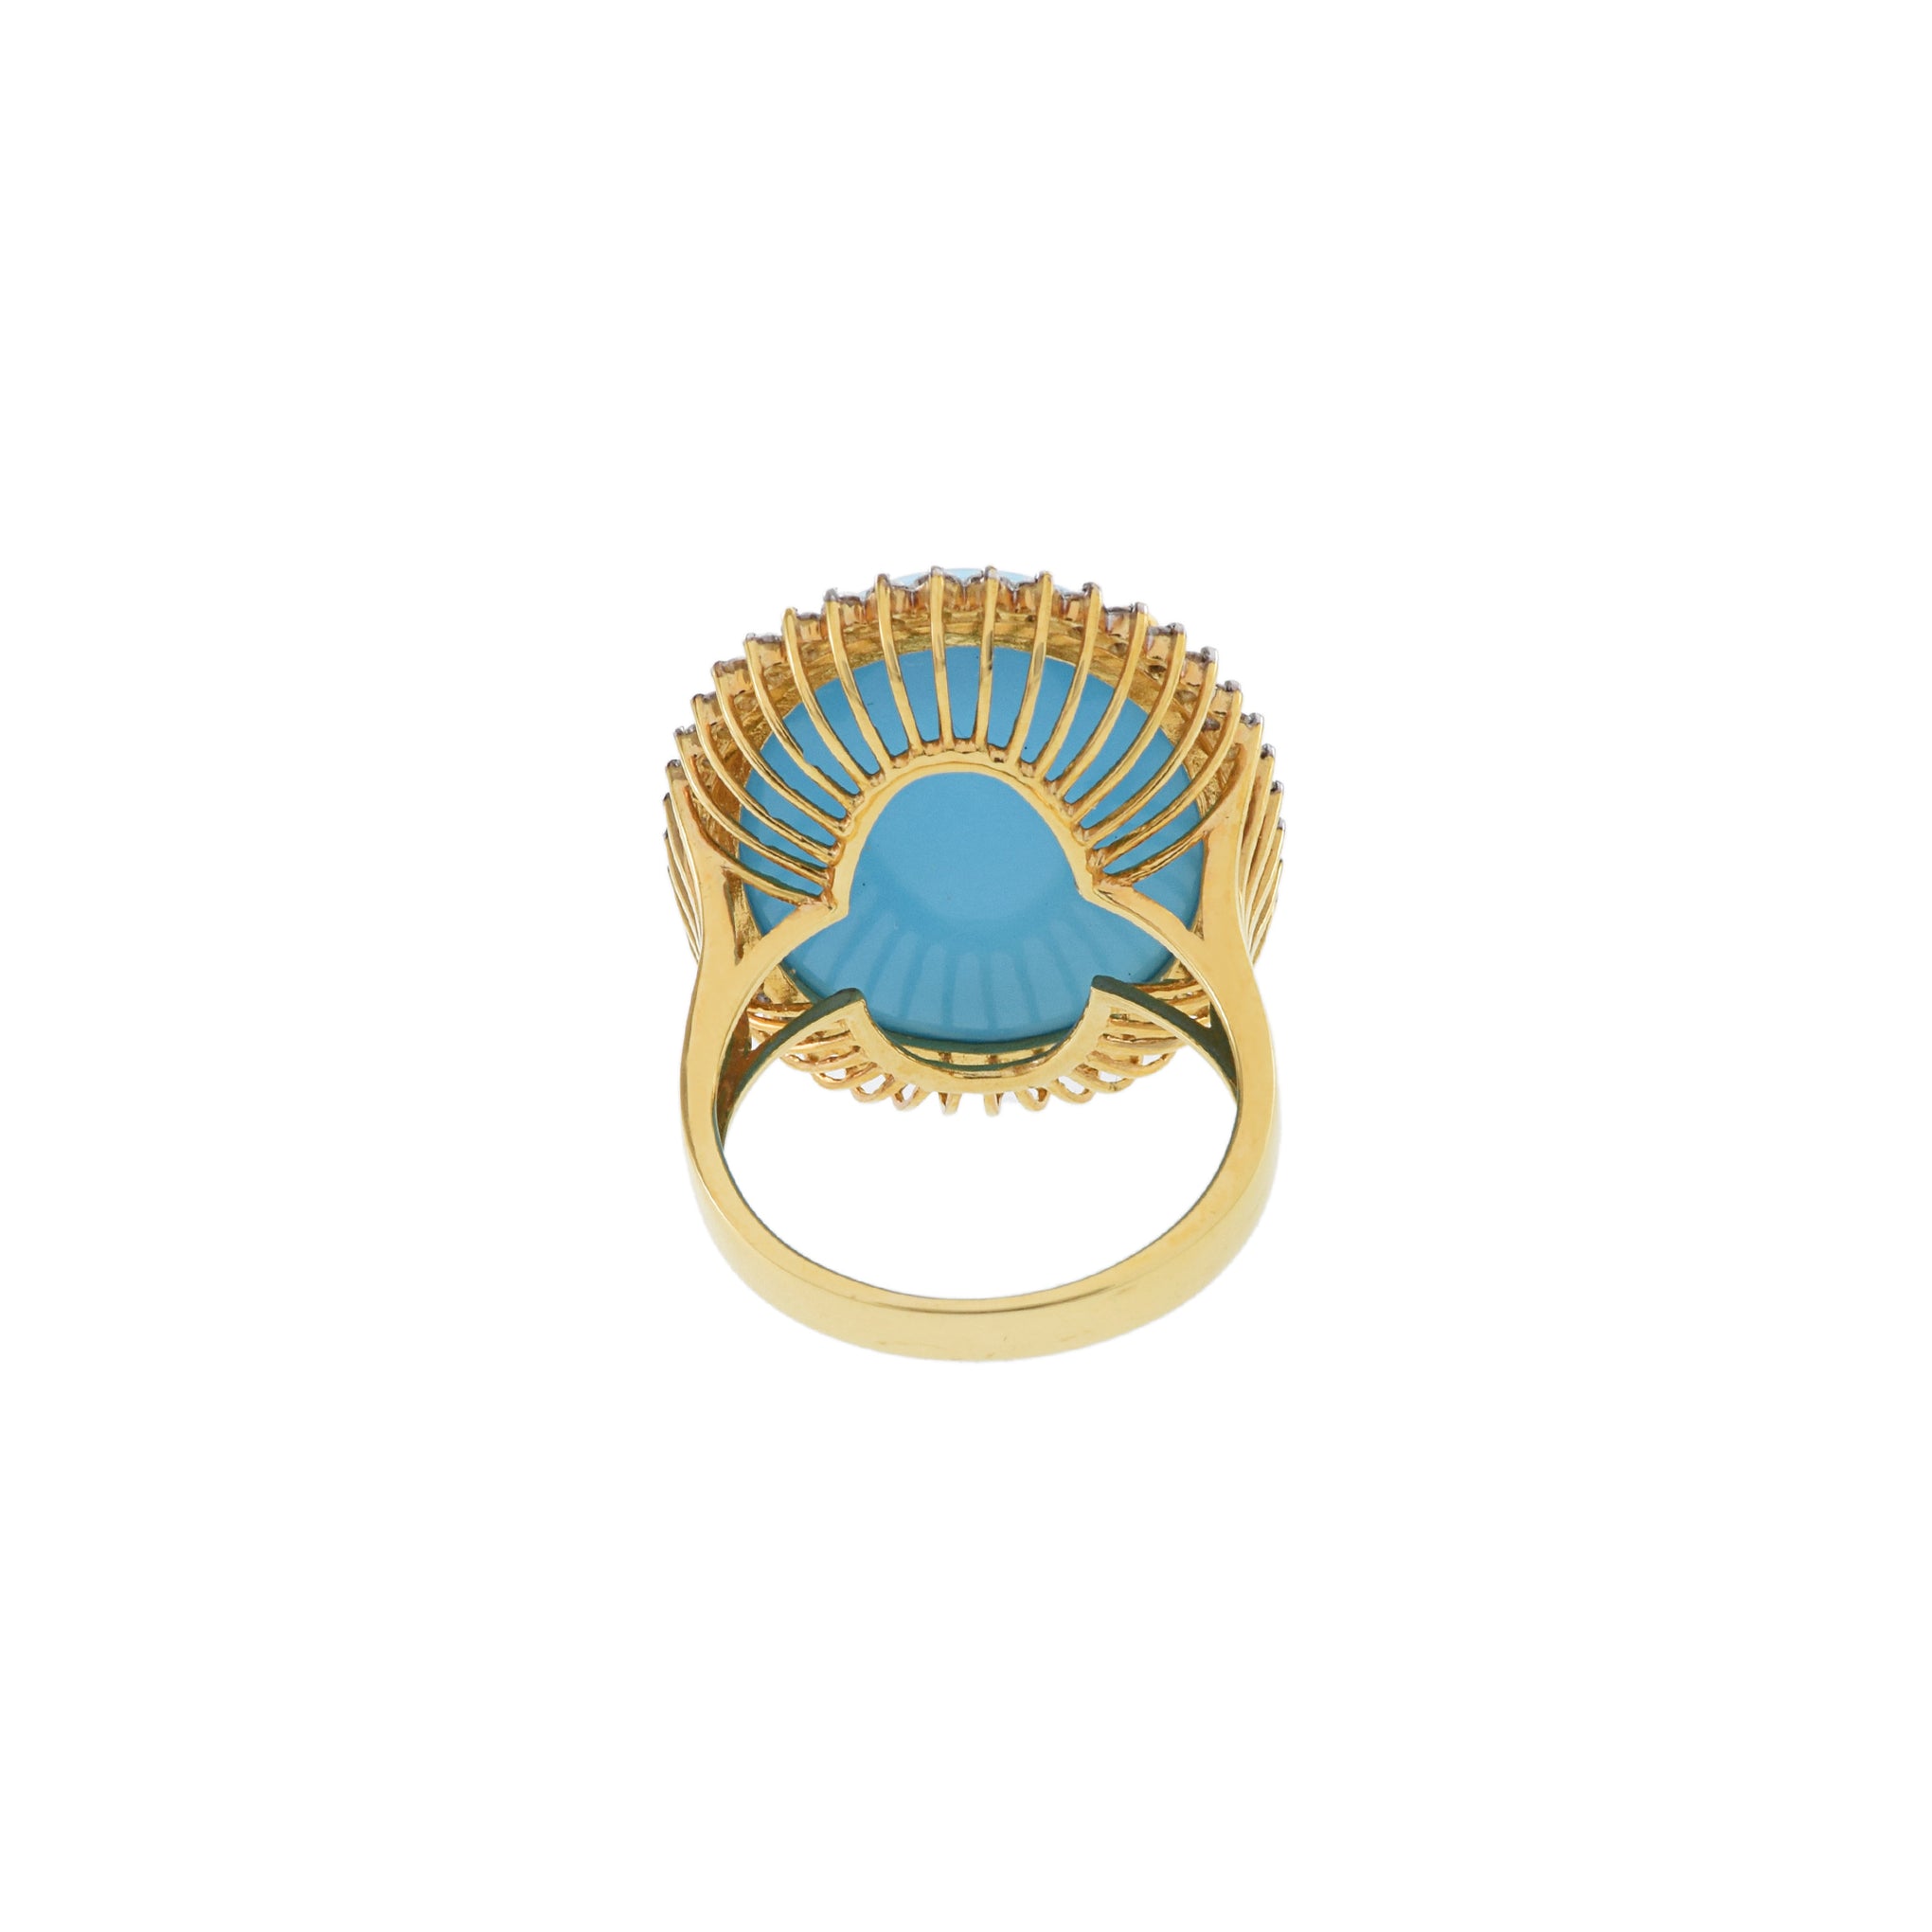 18kt Yellow Gold Natural Sleeping Beauty Turquoise Ring with Diamonds